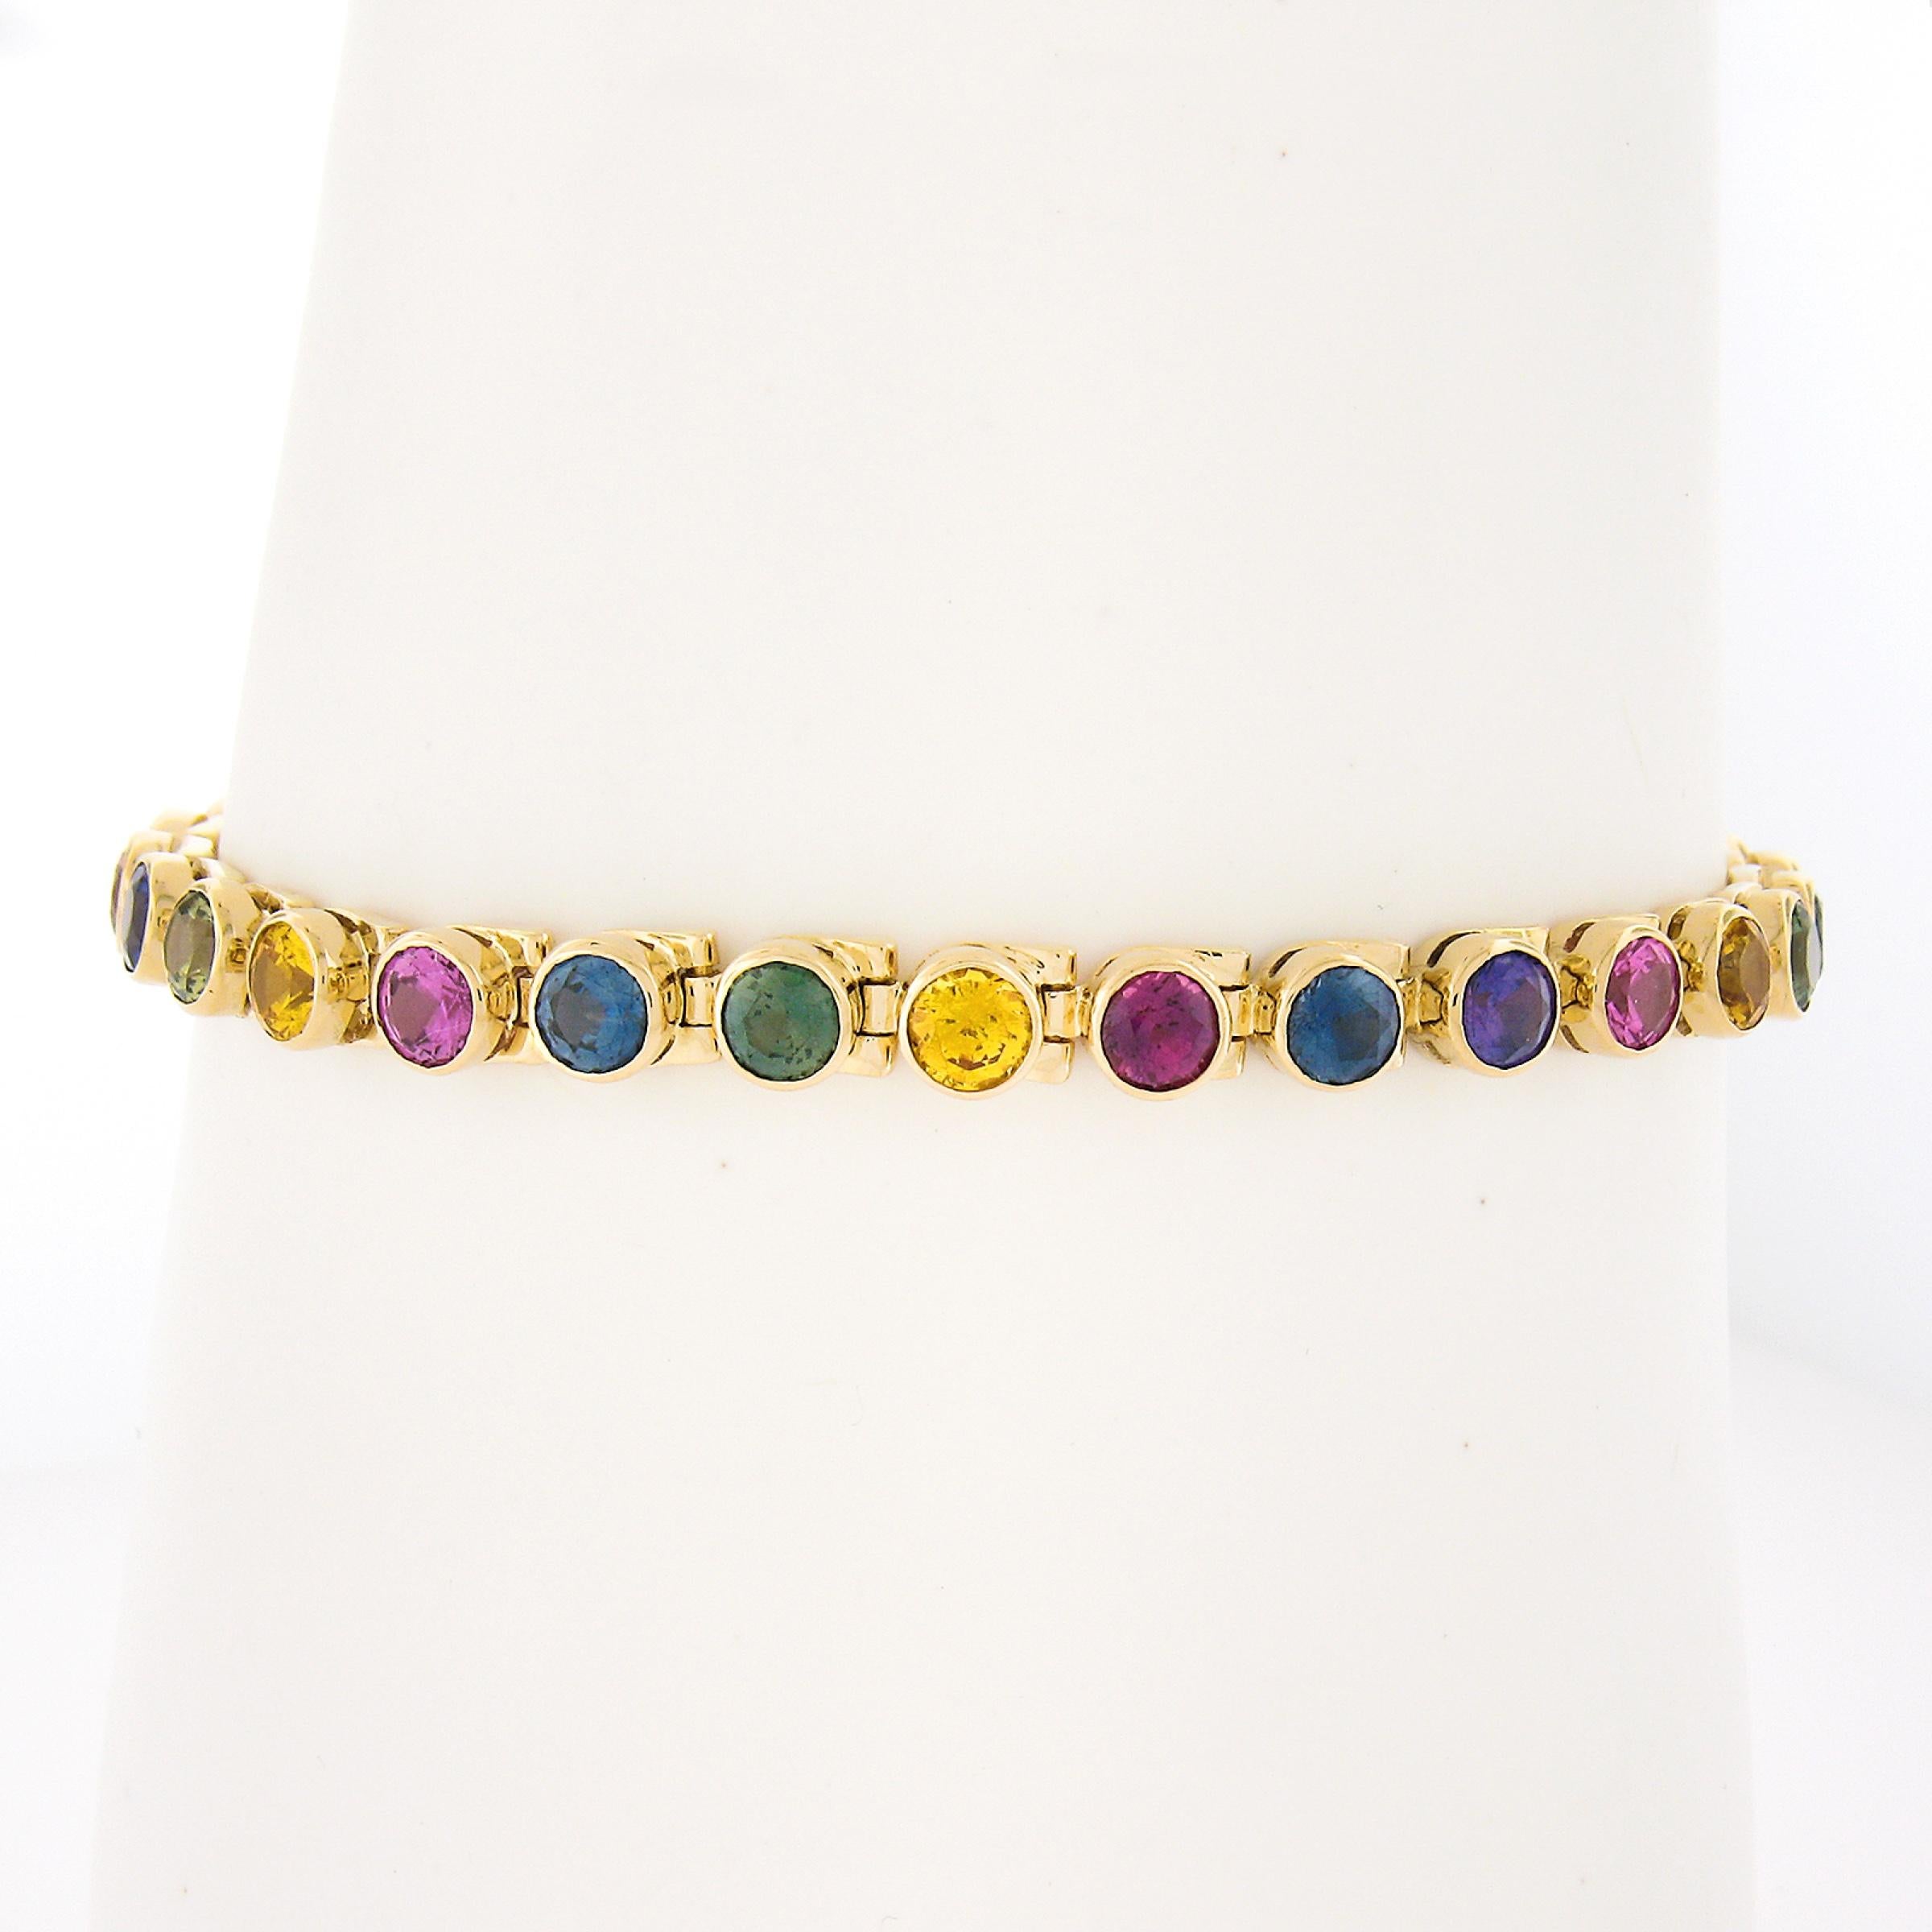 Here we have vivid colored sapphires in unusual round cuts all perfectly bezel set in luscious 18k solid yellow gold - must anything more be said? Enjoy!

--Stone(s):--
(29) Natural Genuine Sapphires - Round Brilliant Cut - Bezel Set - Vivid Vibrant